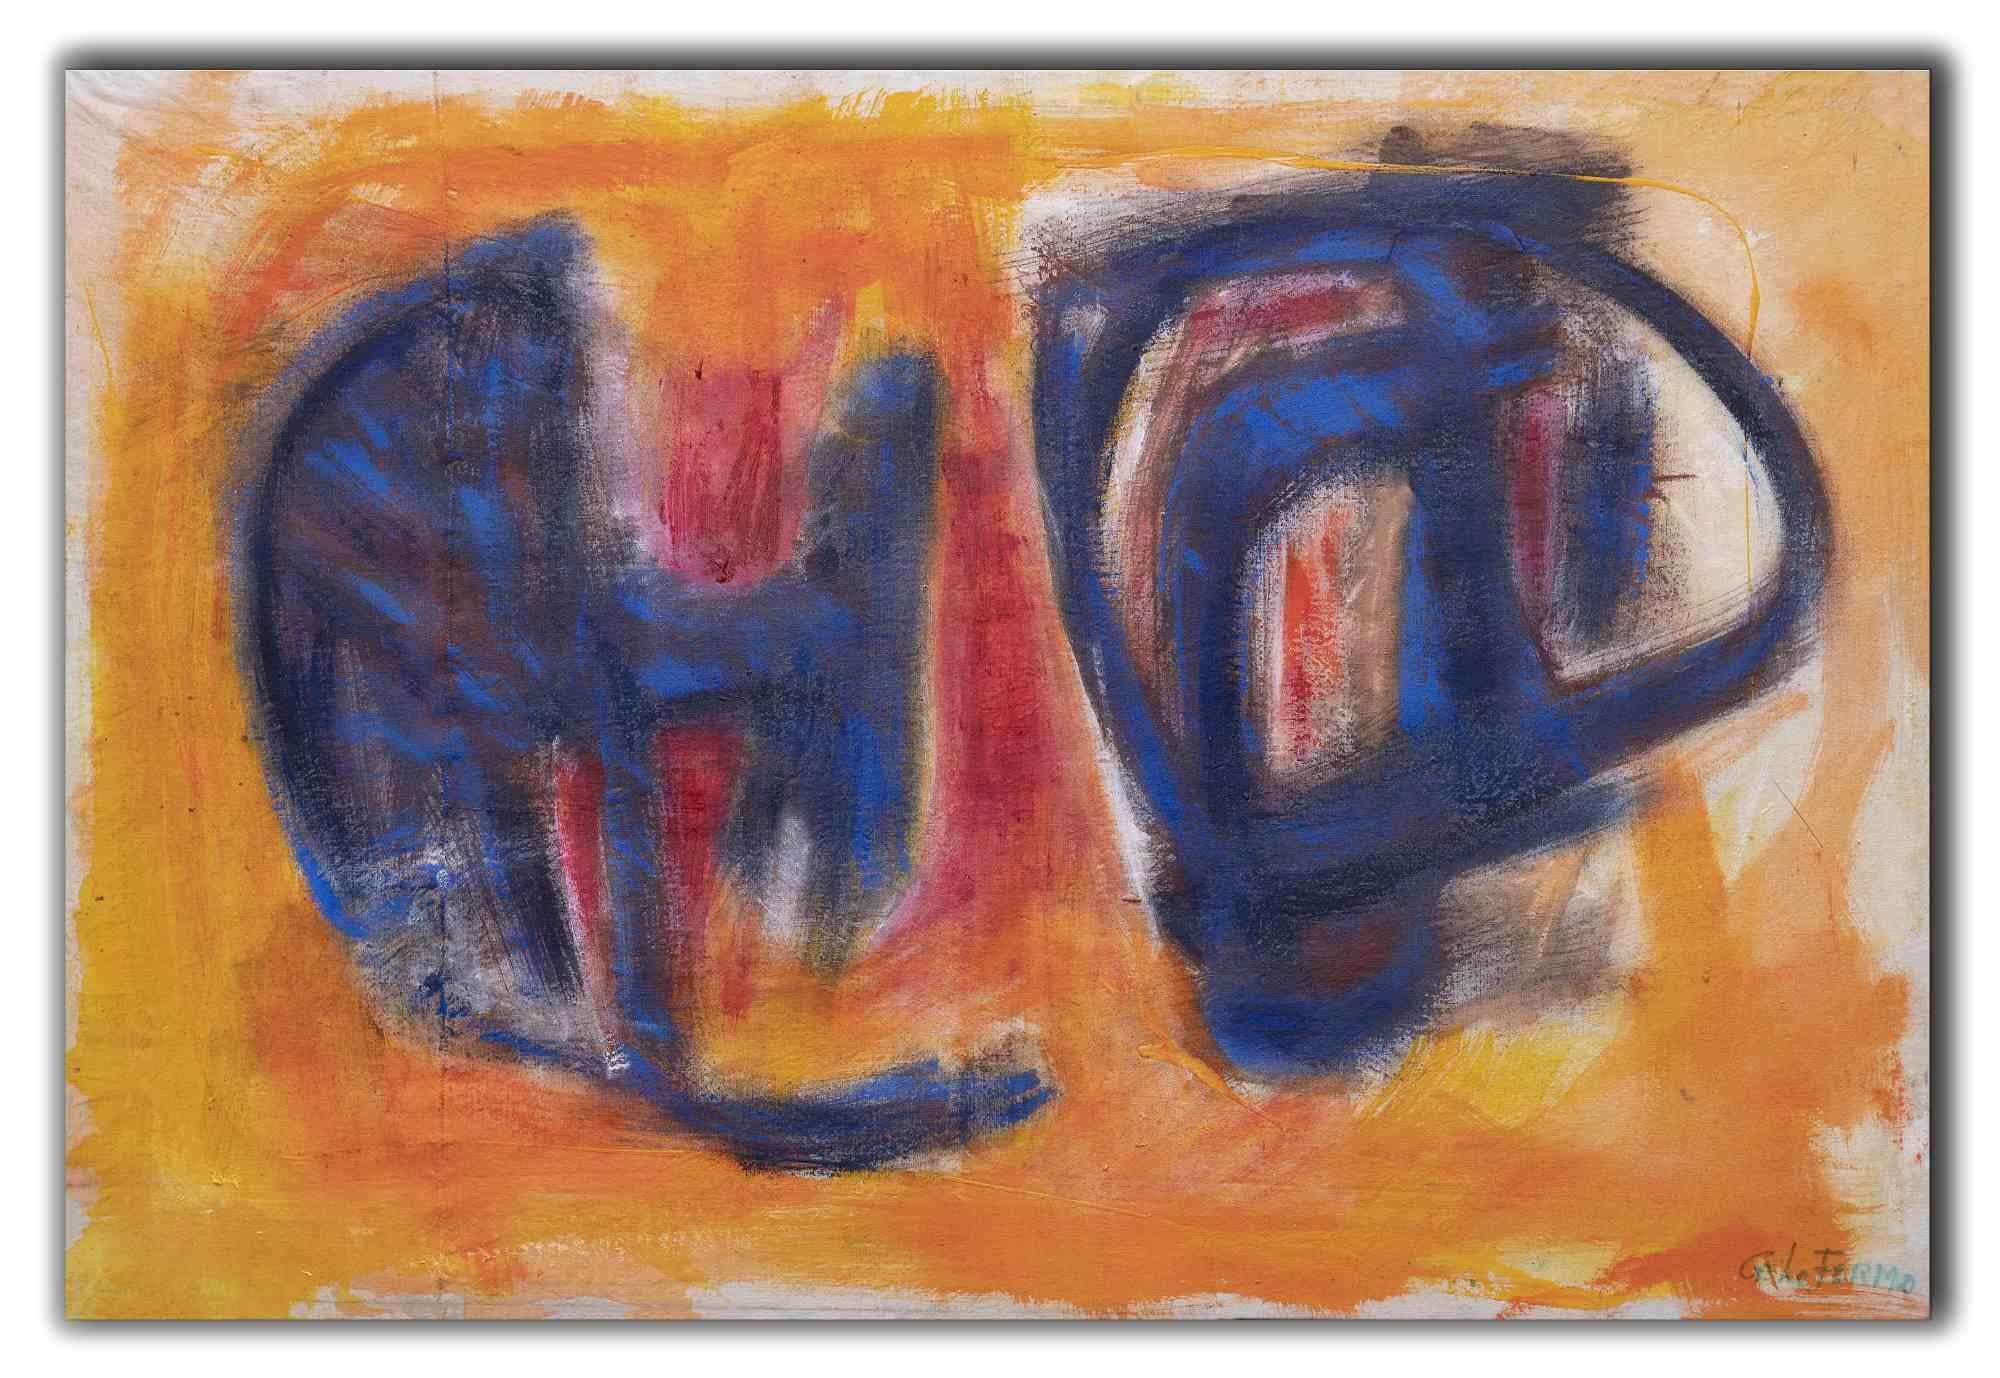 Abstract Expression is an original artwork realized by Giorgio Lo Fermo (b. 1947) in 2014.

Original Oil Painting on Canvas.

Hand-signed, titled and dated on the back of the canvas.

Hand-signed on the lower right corner.

Mint conditions.

Giorgio